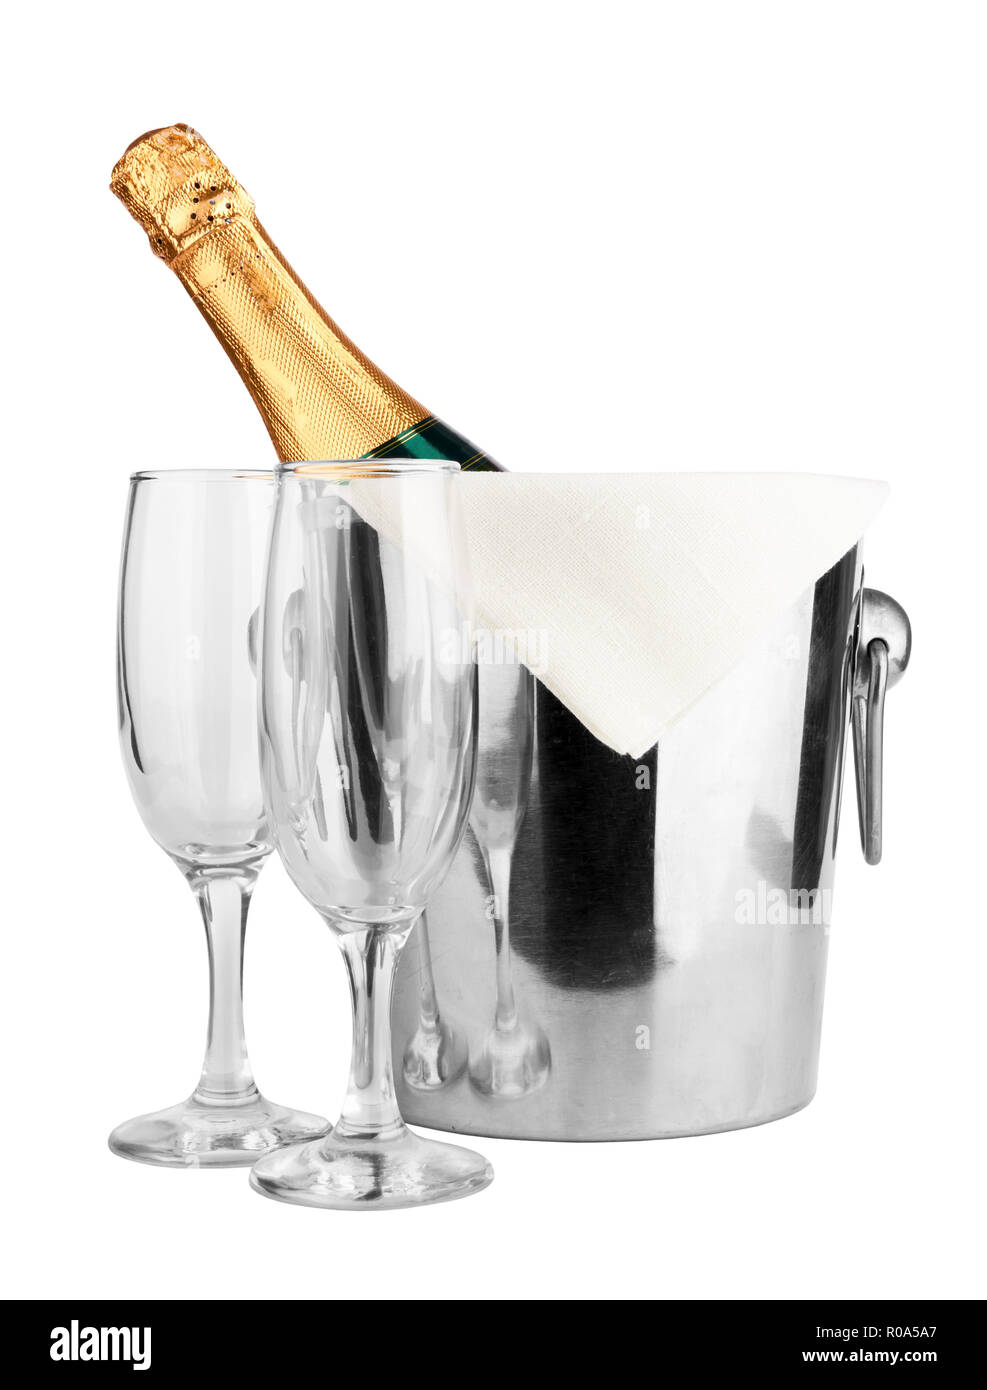 Champagne bottle in cooler and two champagne glasses Stock Photo